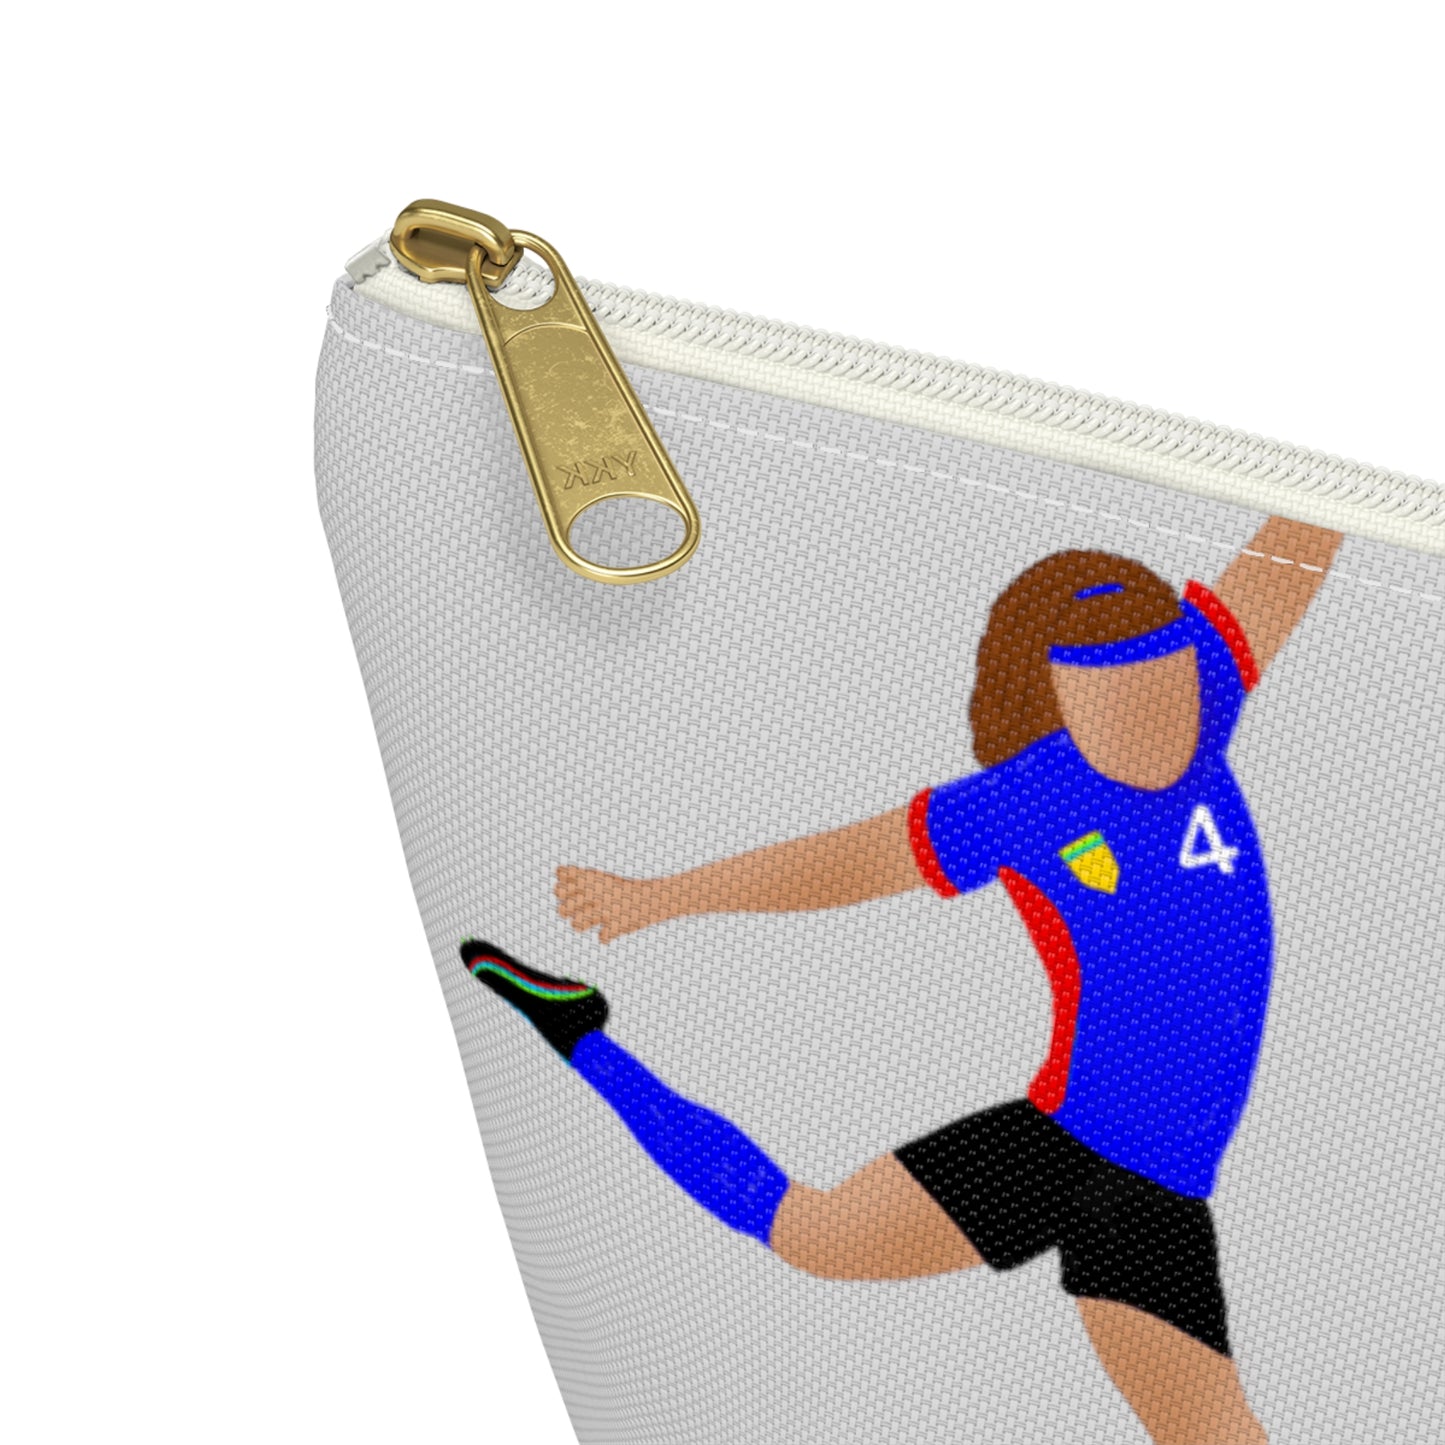 Active Cutie Soccer Accessory Pouch(PICK YOUR SKIN TONE)